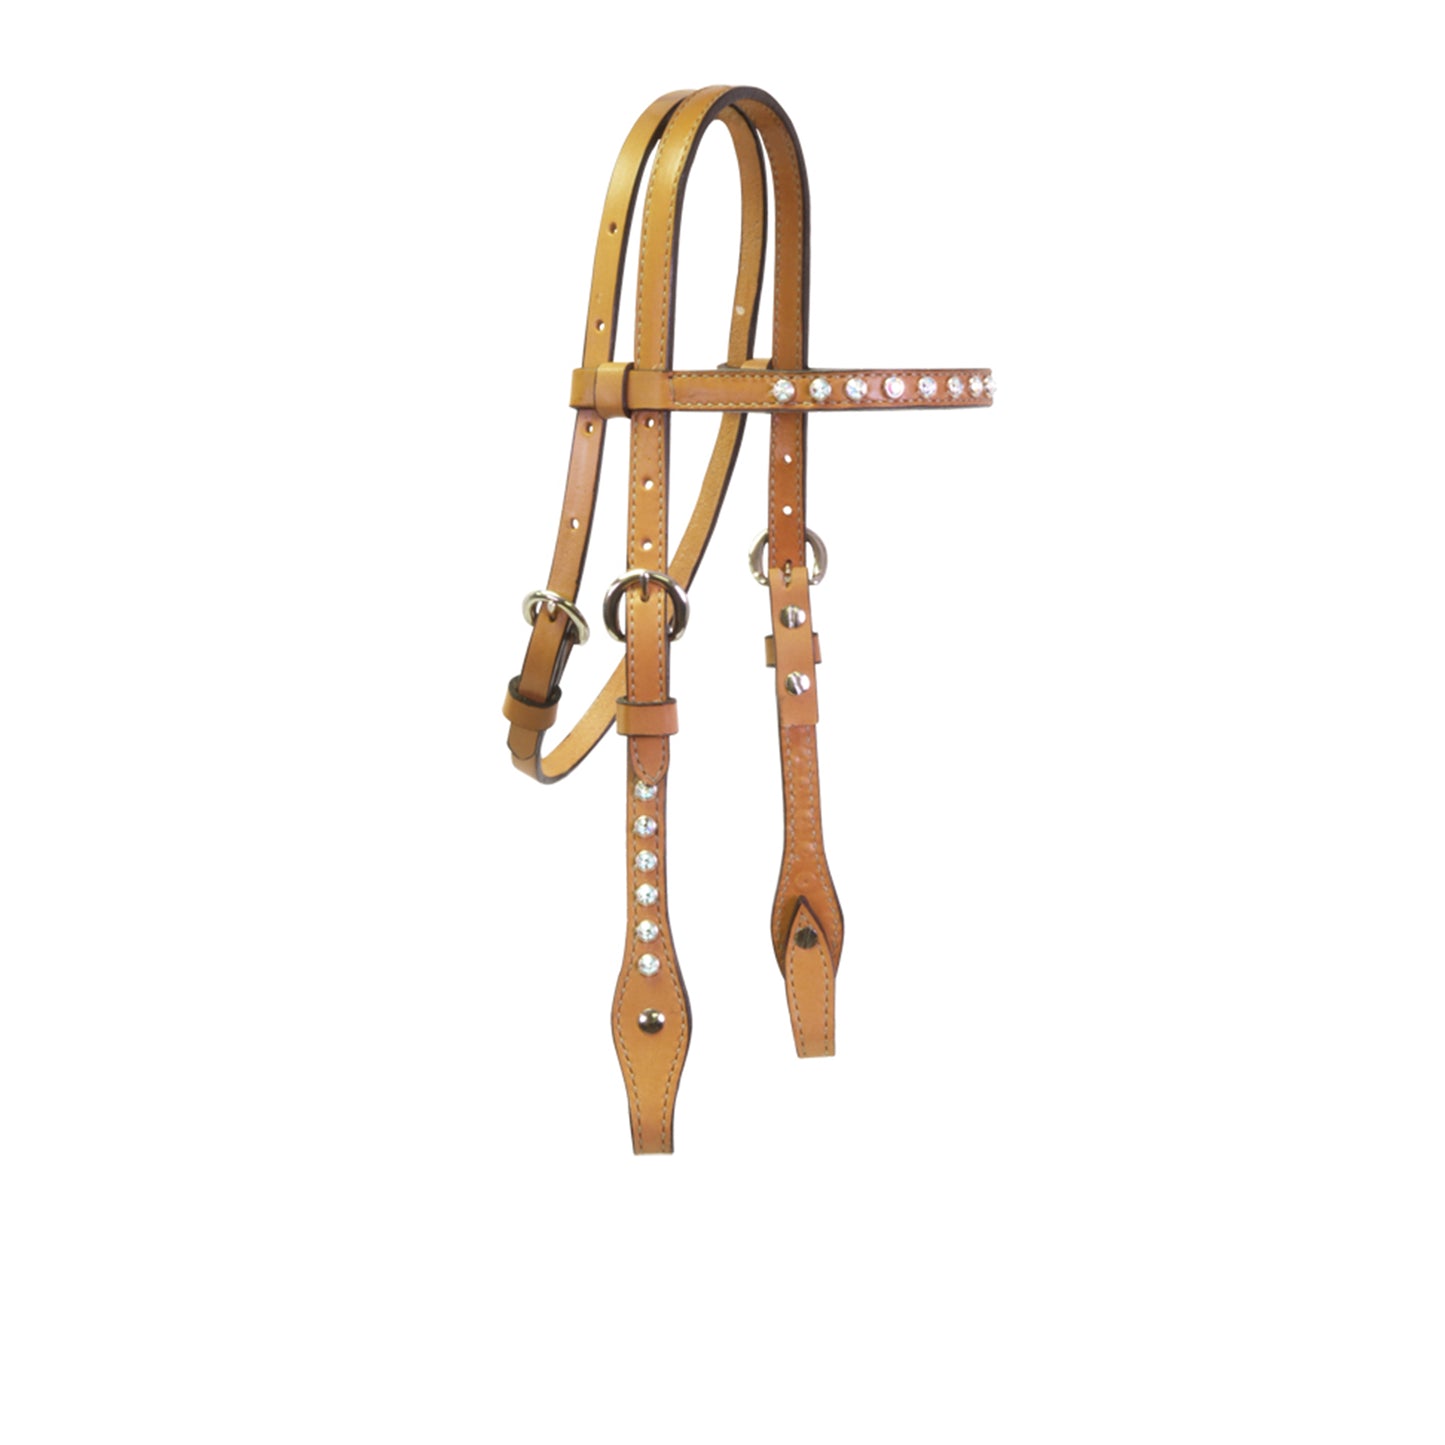 1/2" Pony straight browband headstall golden leather with Swarovski crystals.  